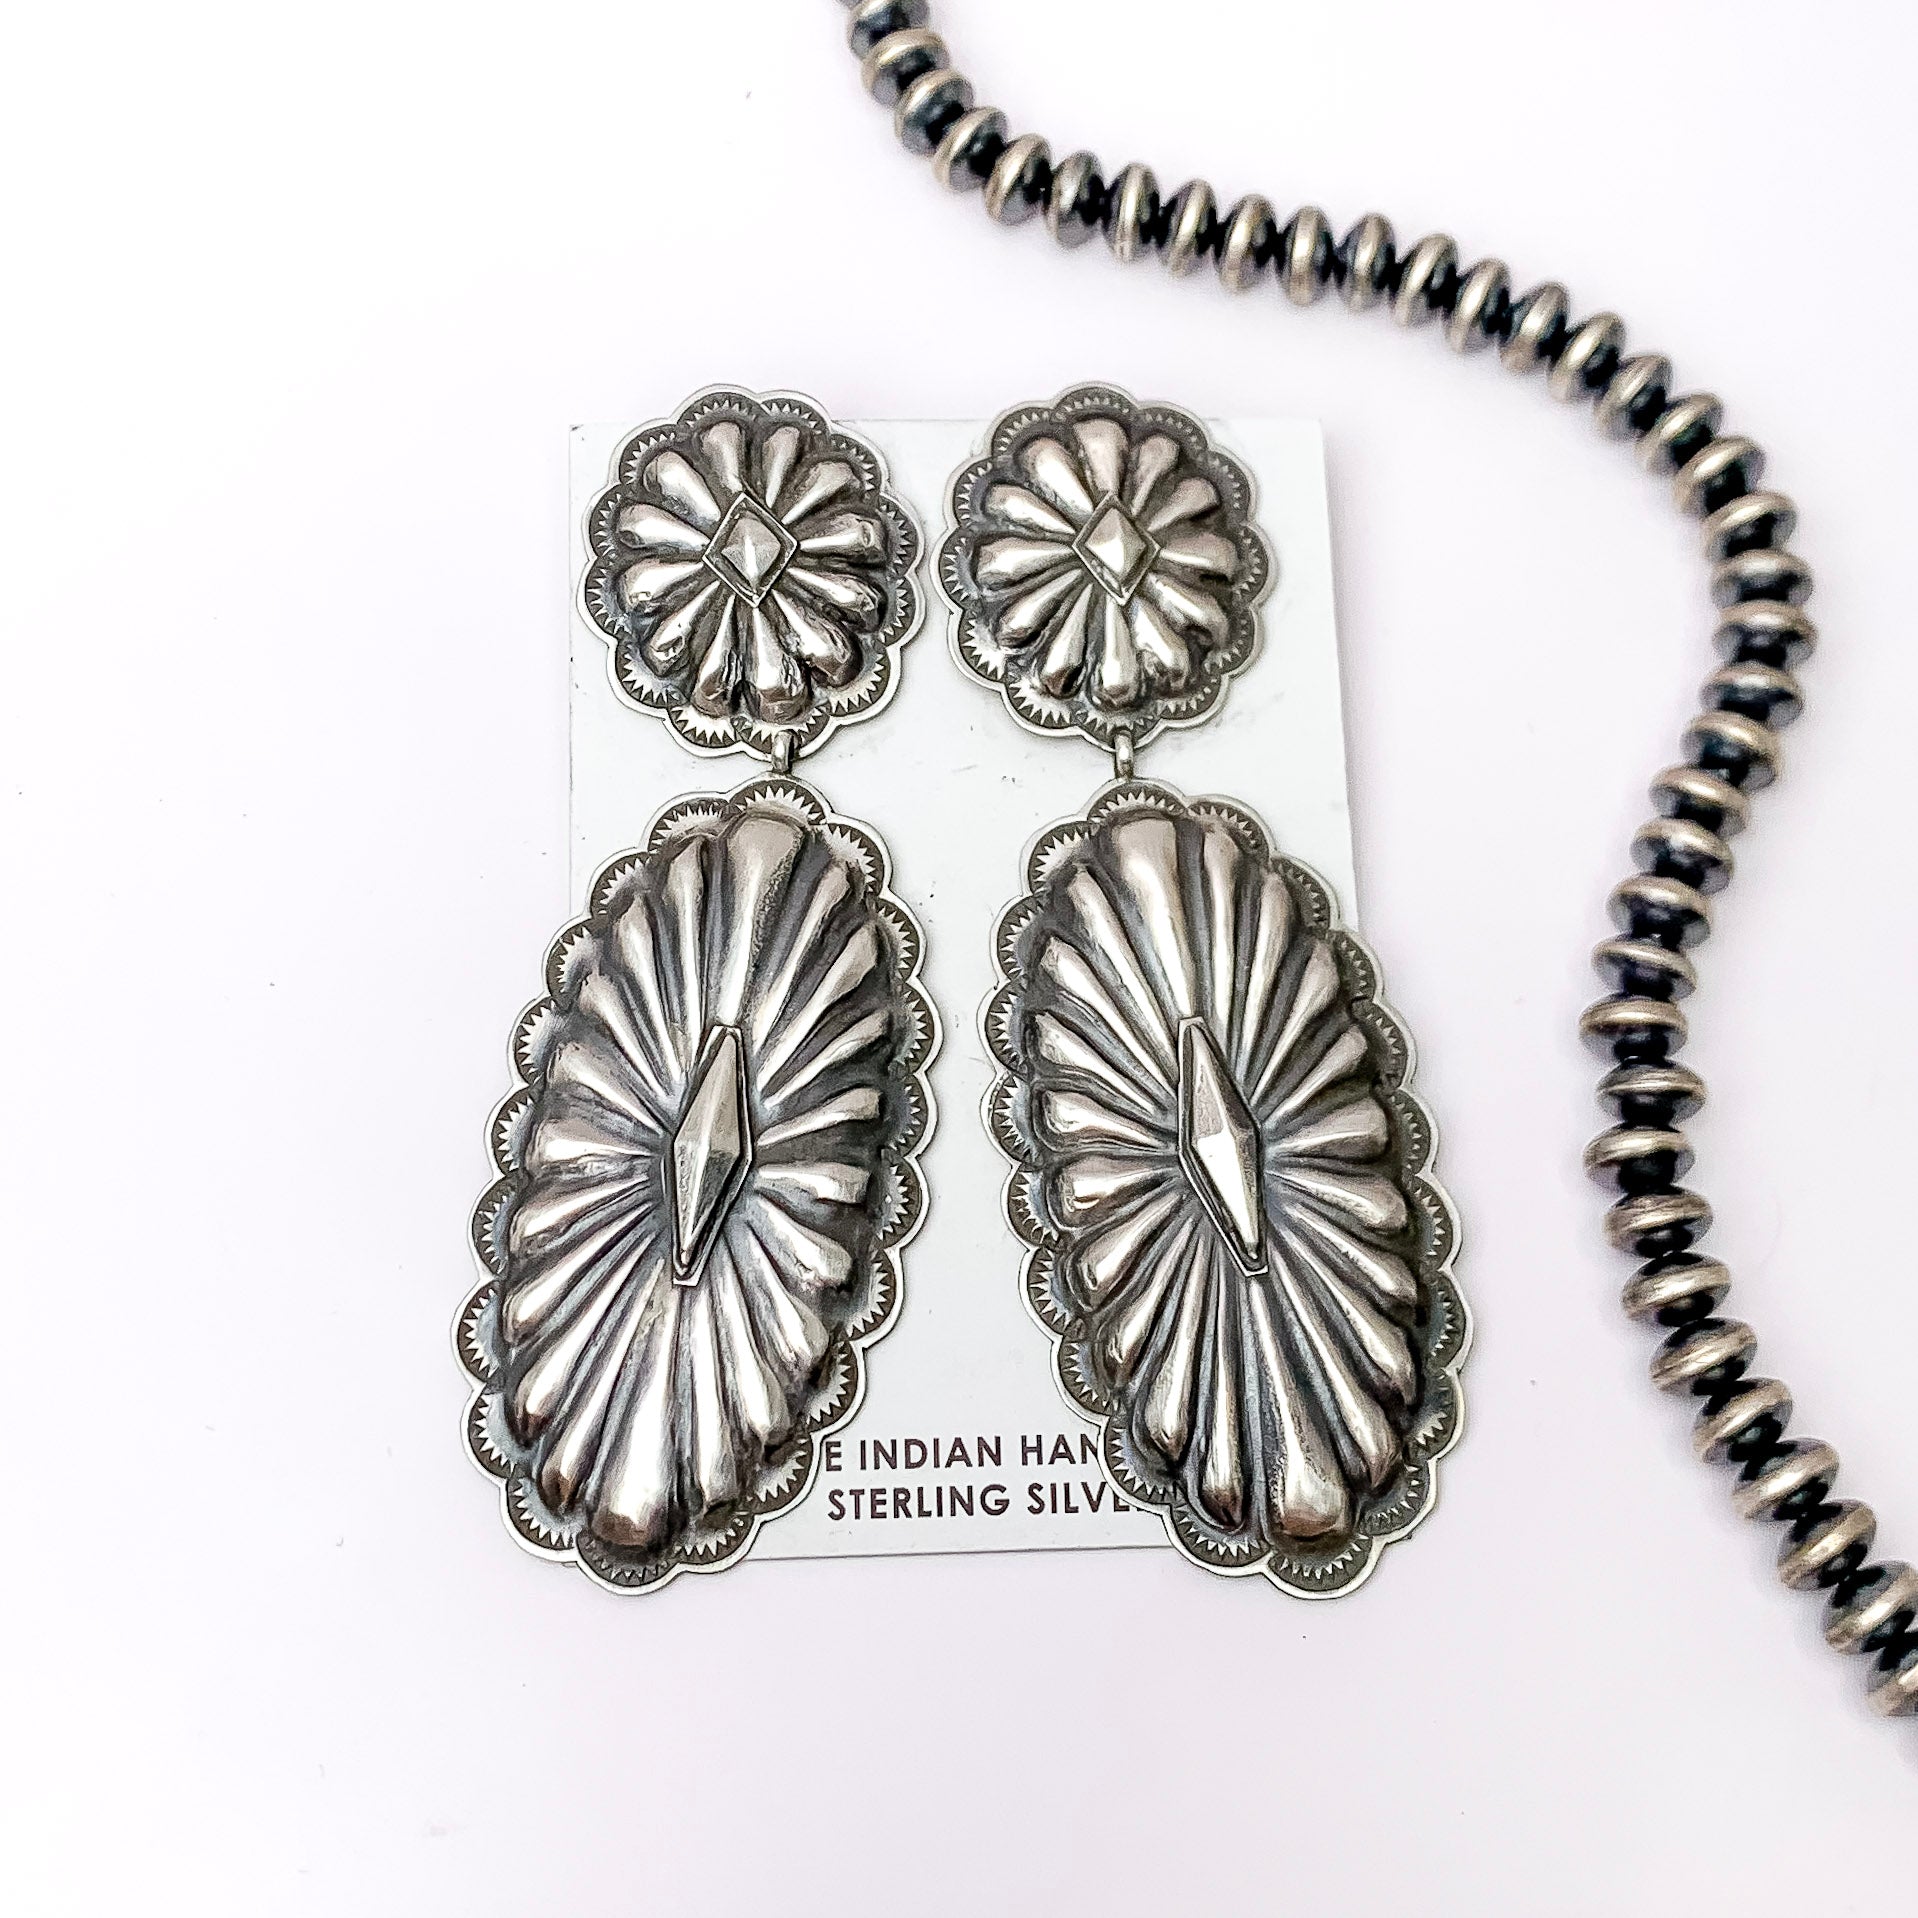 Centered in the picture is a pair of studded concho earrings on a white background. 